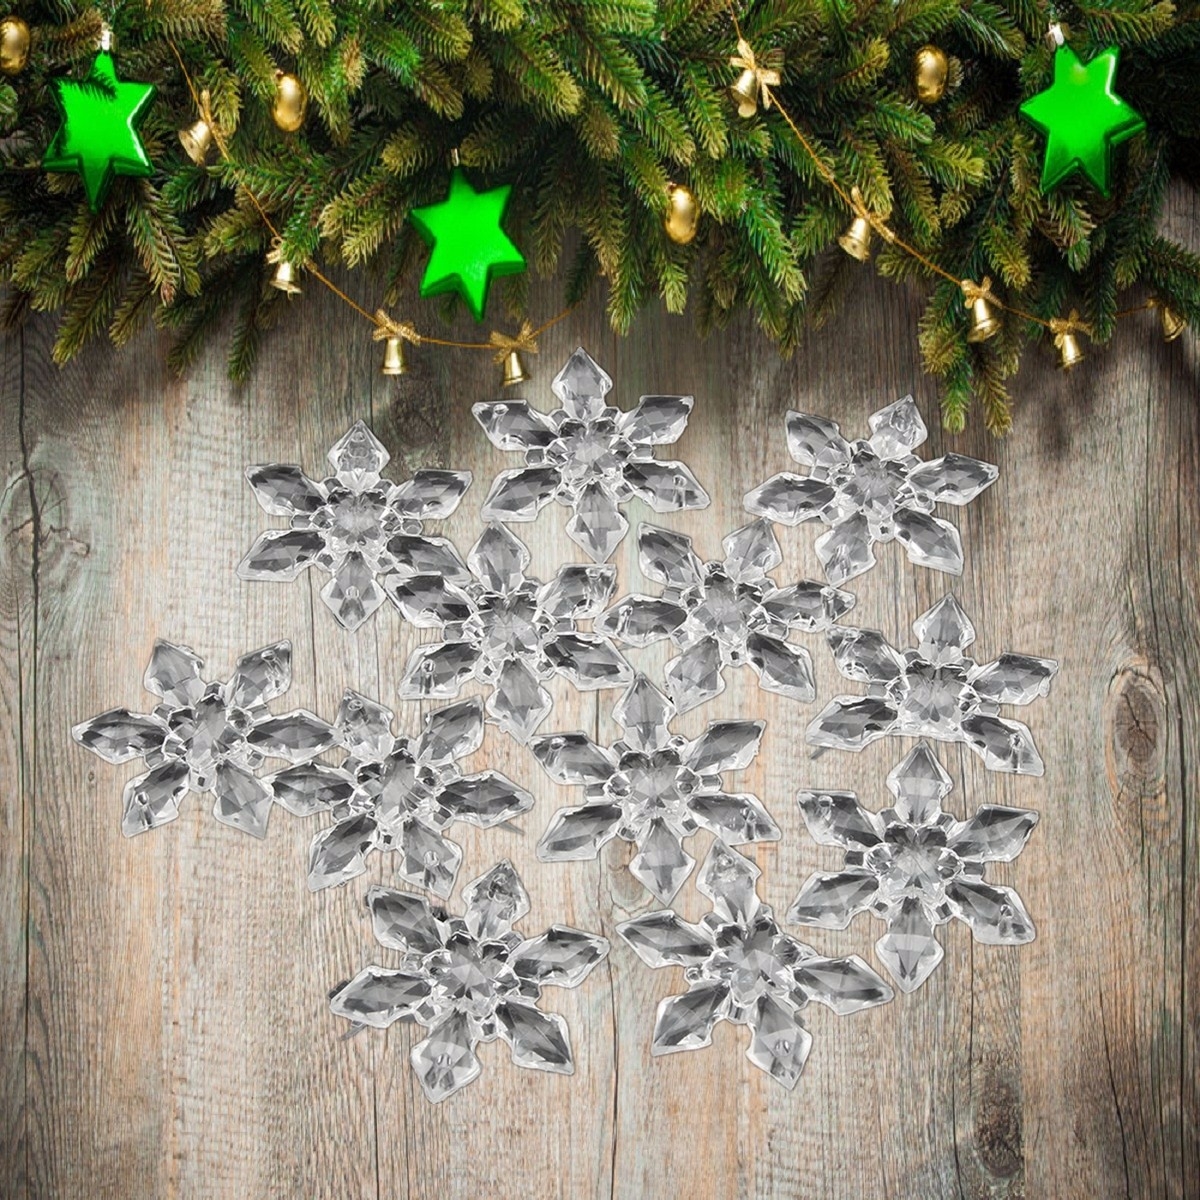 12Pcs Snowflakes Ornaments Gift Party Christmas Tree Hanging Decoration